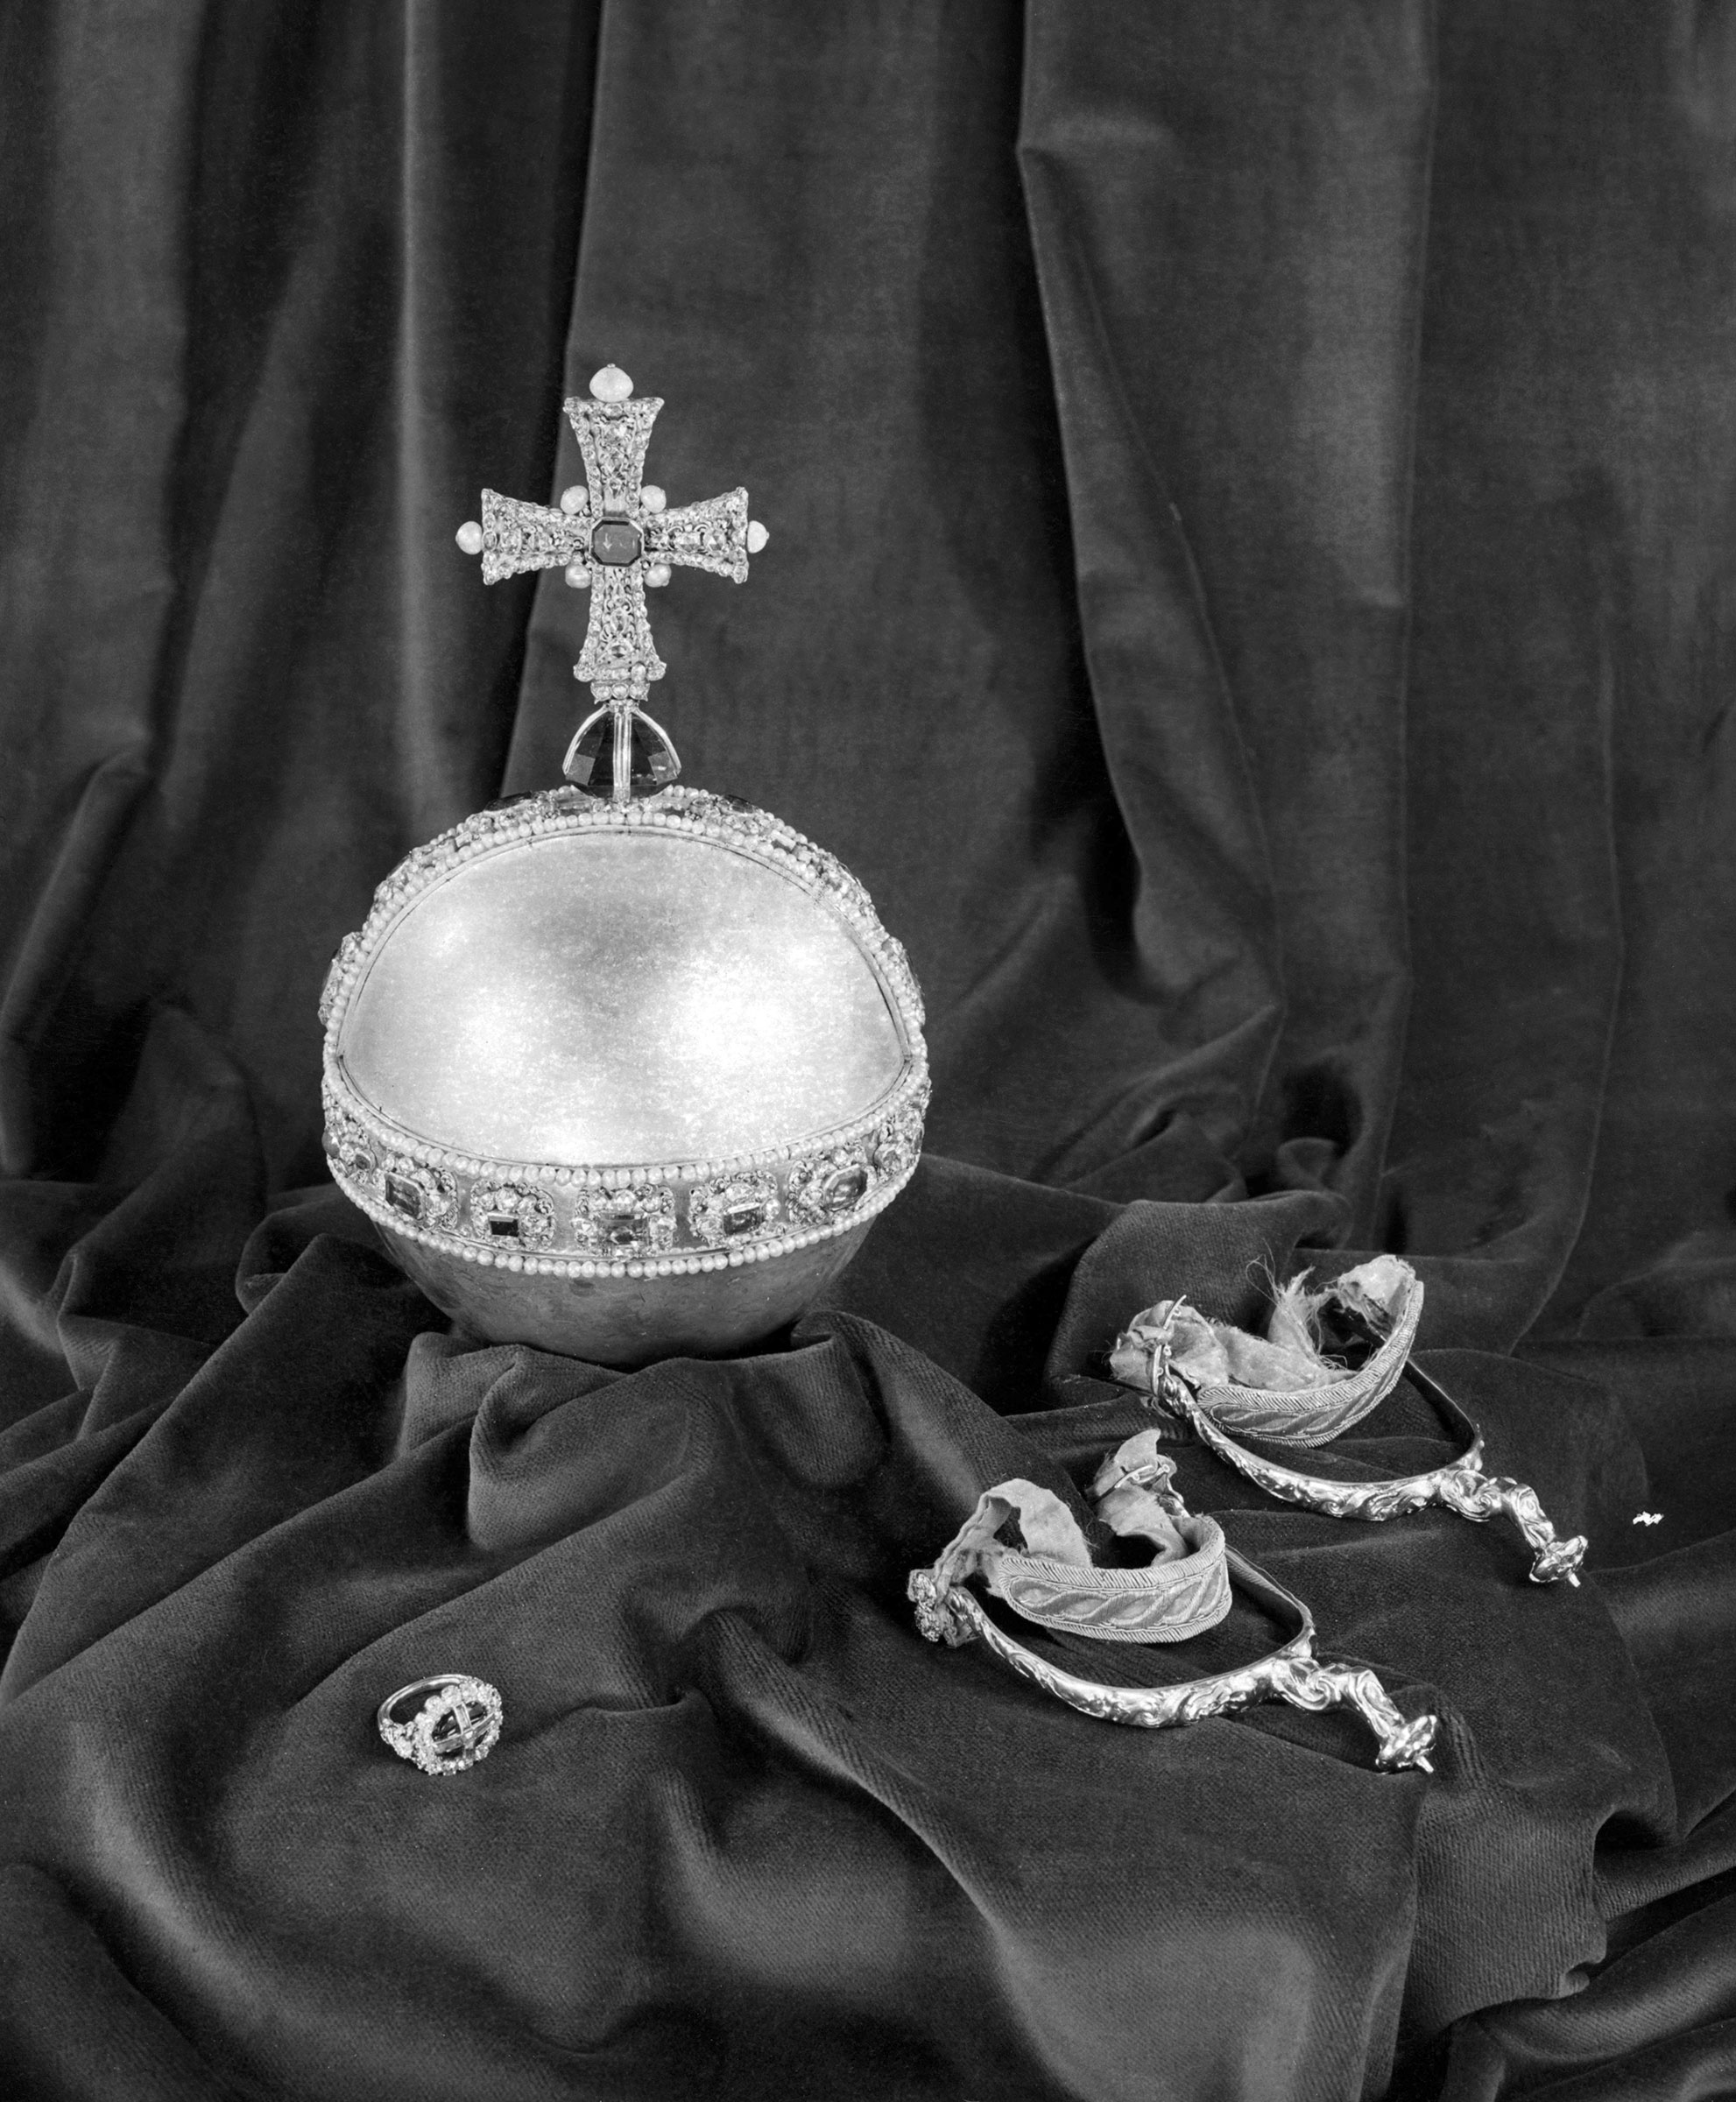 The Spurs, the Orb, and the Sovereign's Ring will play a starring role at the coronation of King Charles III. (PA Wire/PA Images)